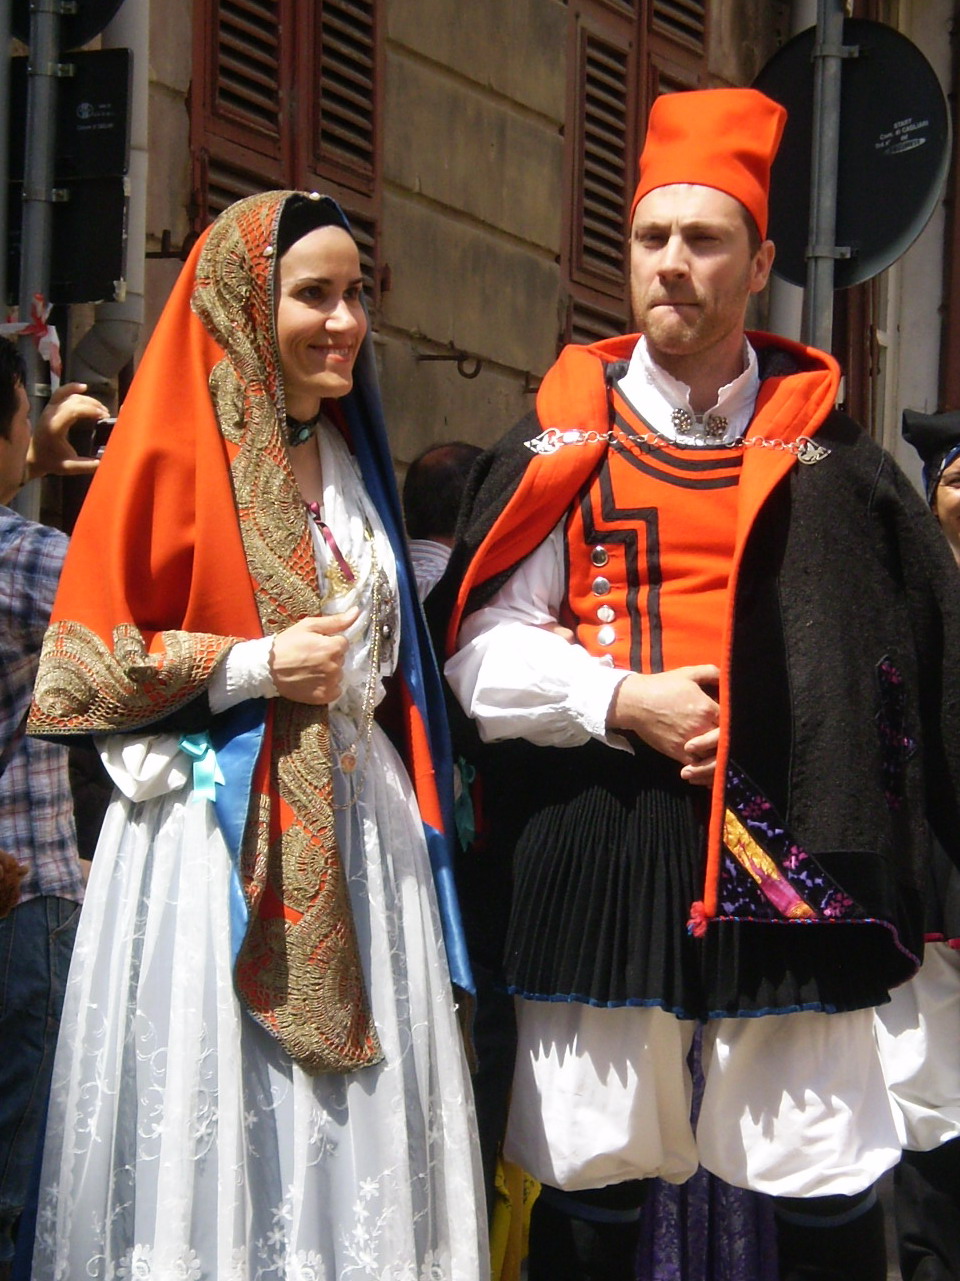 an orange hat a woman and a man wearing costume